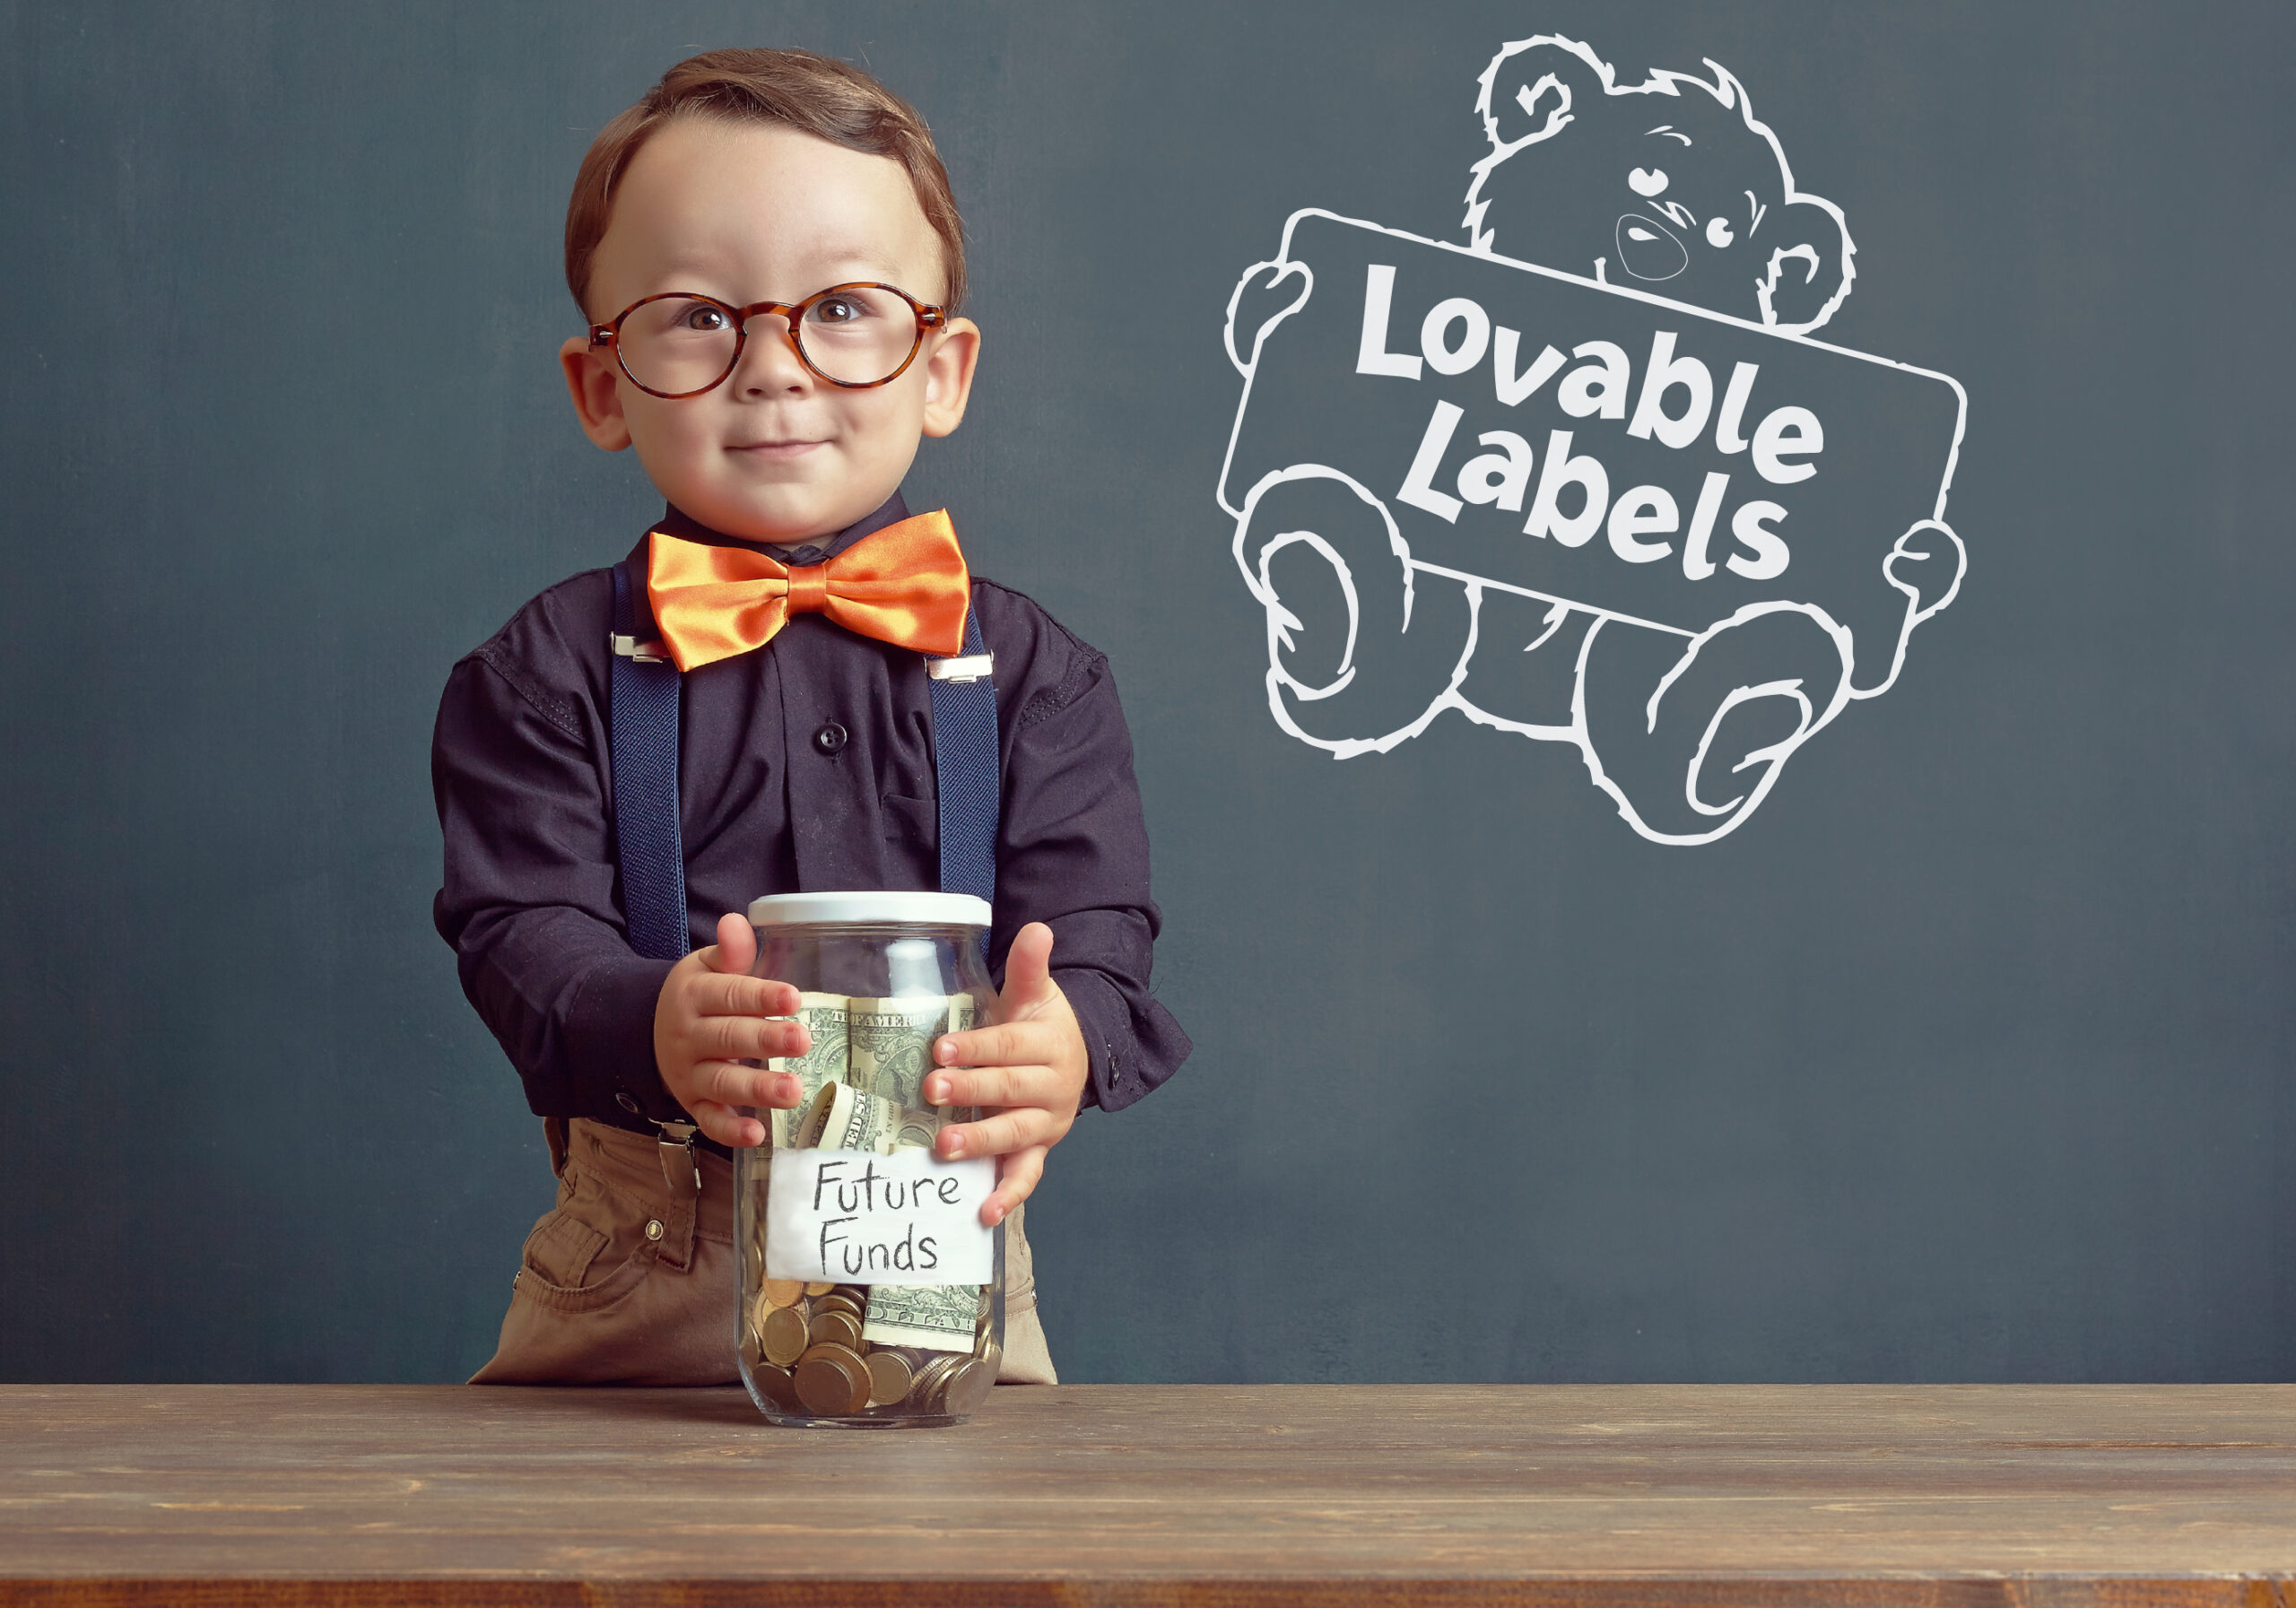 5 Reasons to Choose Lovable Labels as your Next Fundraiser!